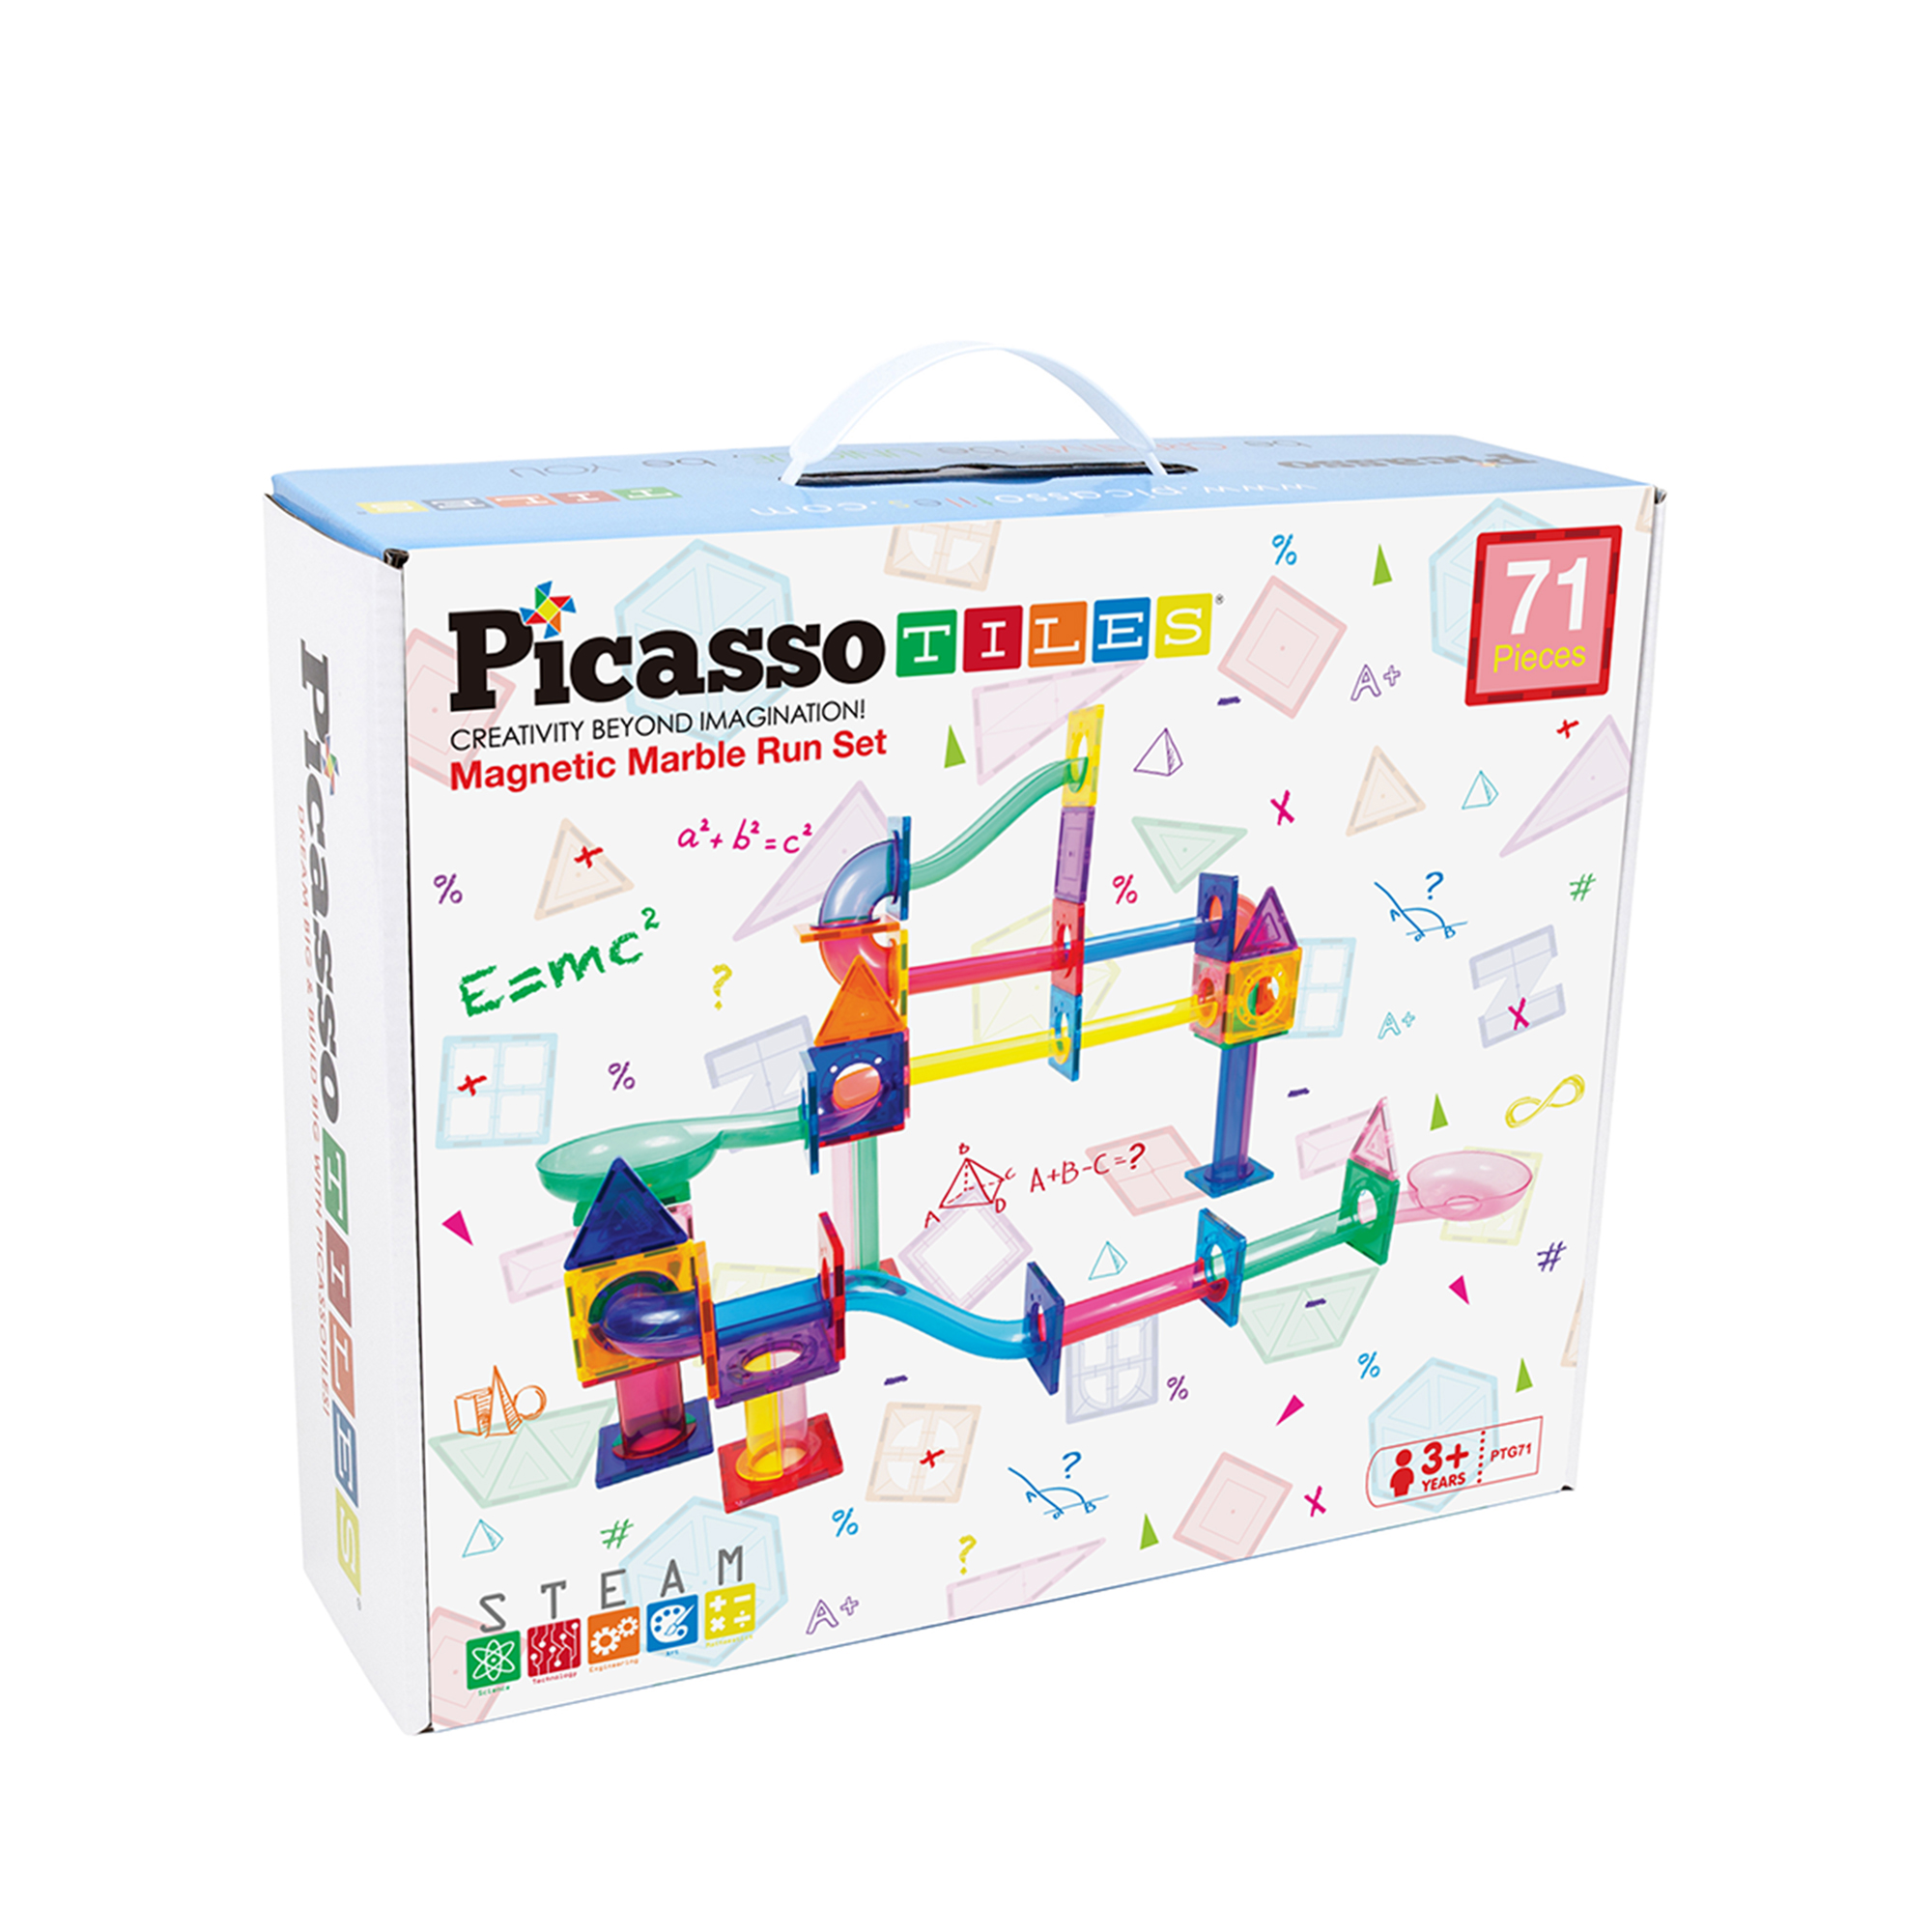 PicassoTiles Magnetic Marble Run, 71 Pieces